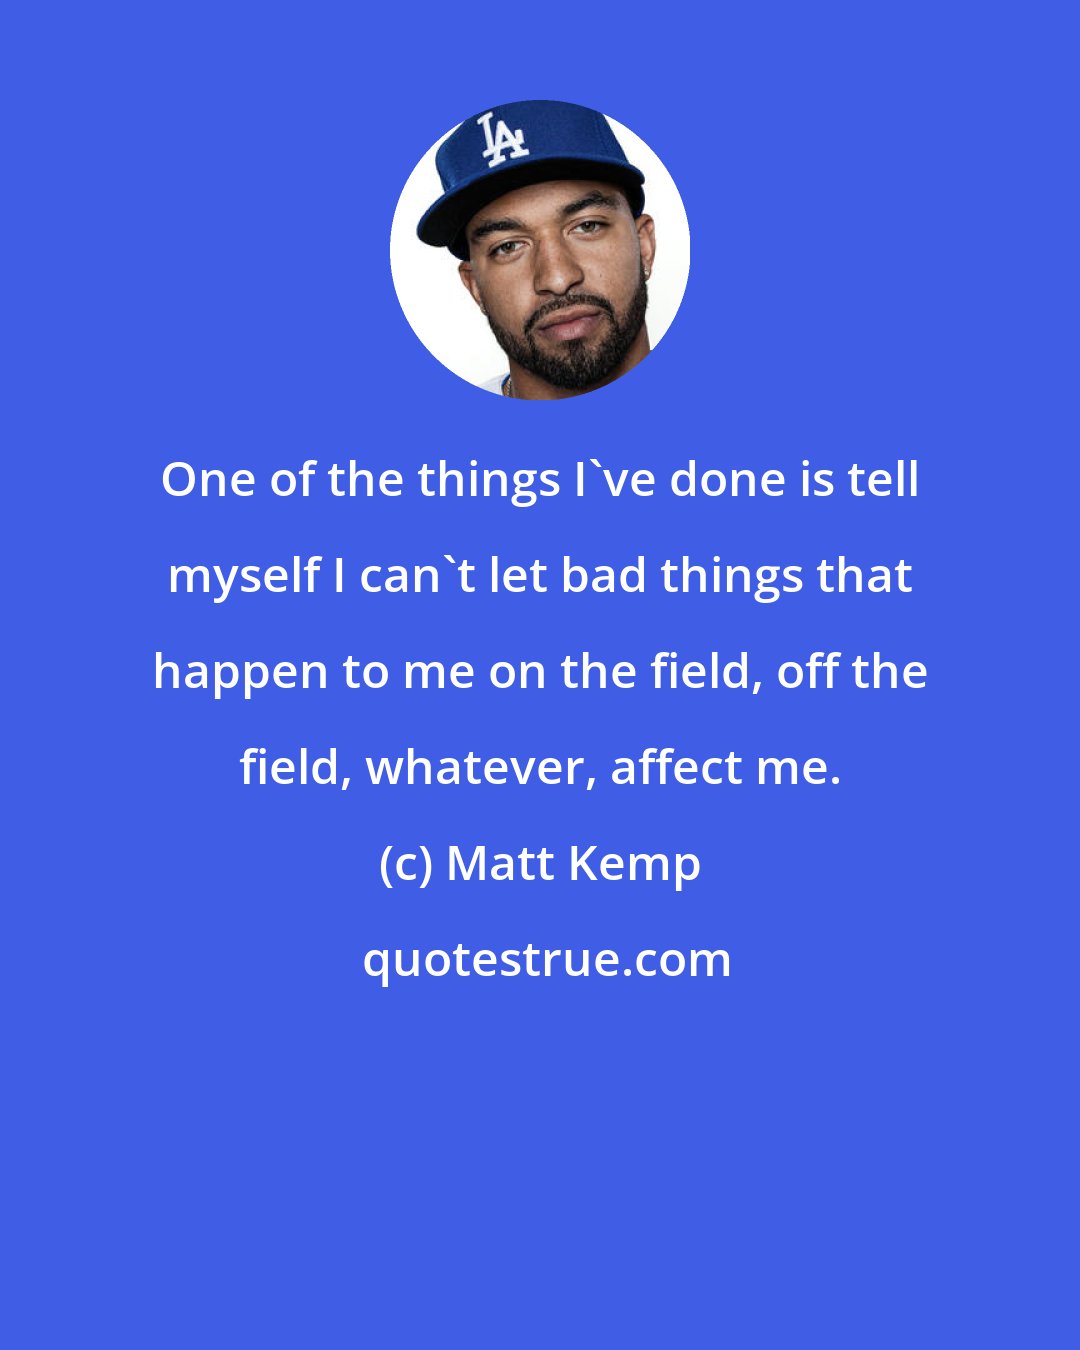 Matt Kemp: One of the things I've done is tell myself I can't let bad things that happen to me on the field, off the field, whatever, affect me.